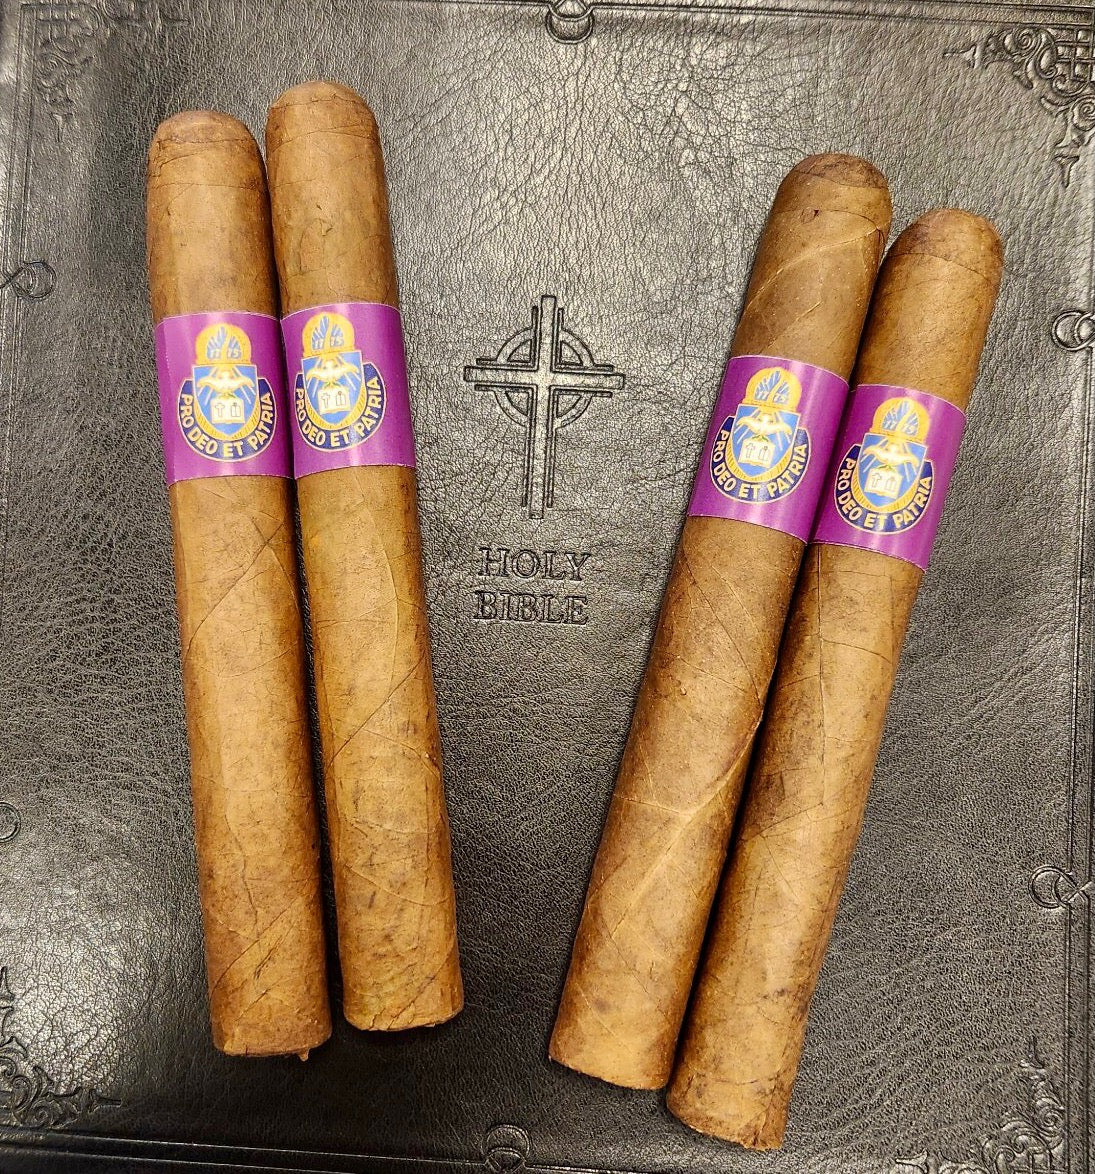 🇺🇸 INTRODUCING THE CHAPLAIN CORPS CIGAR  🇺🇸